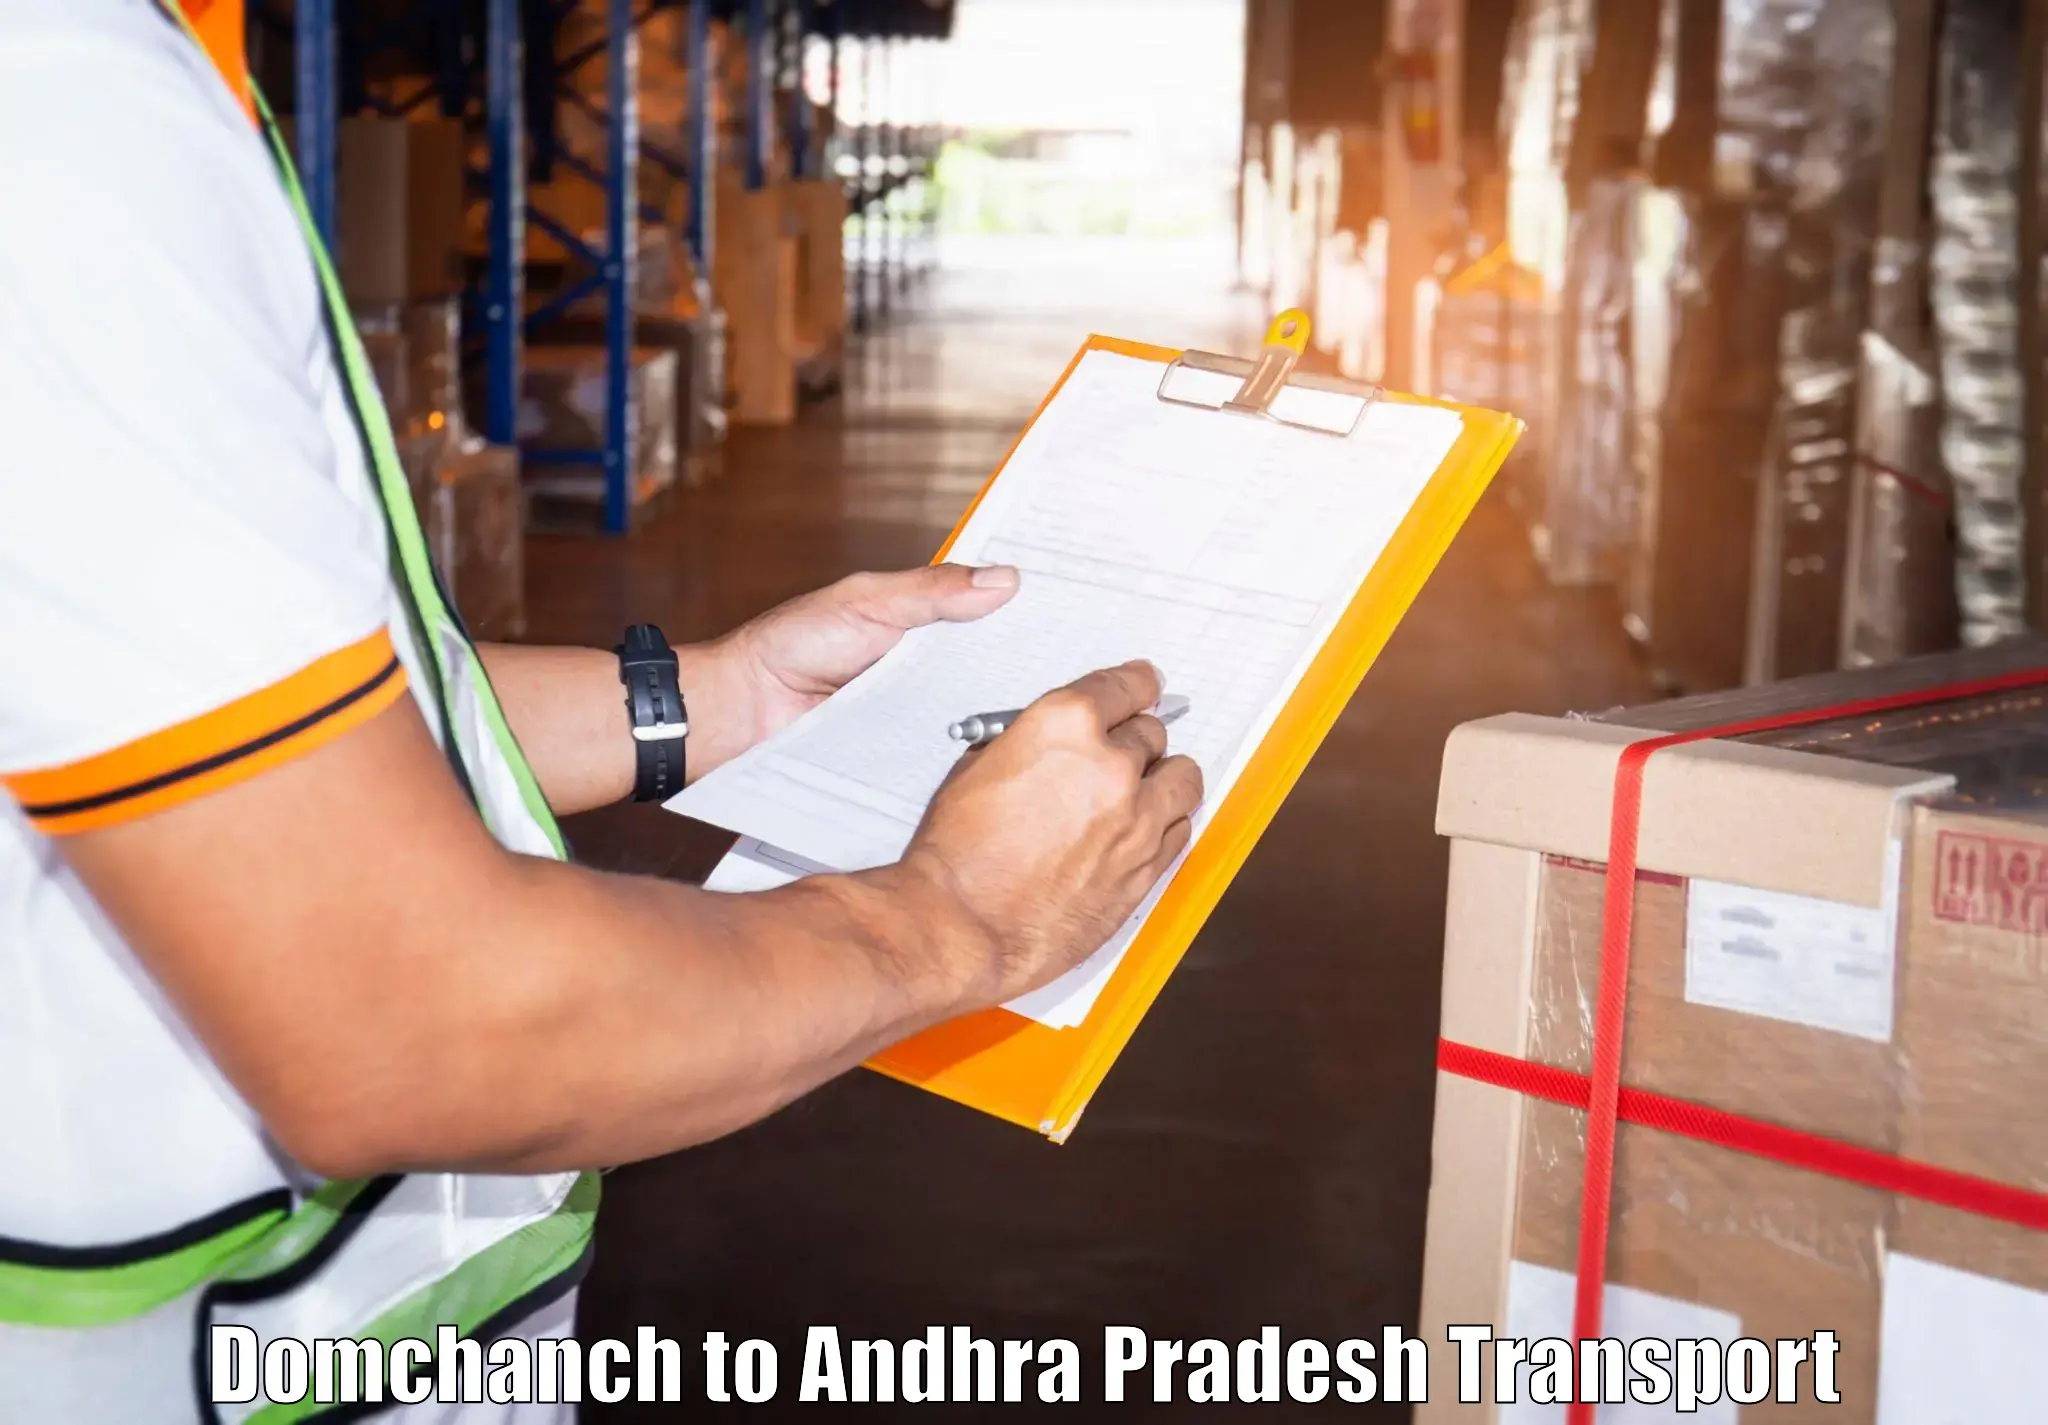 Daily parcel service transport in Domchanch to IIT Tirupati